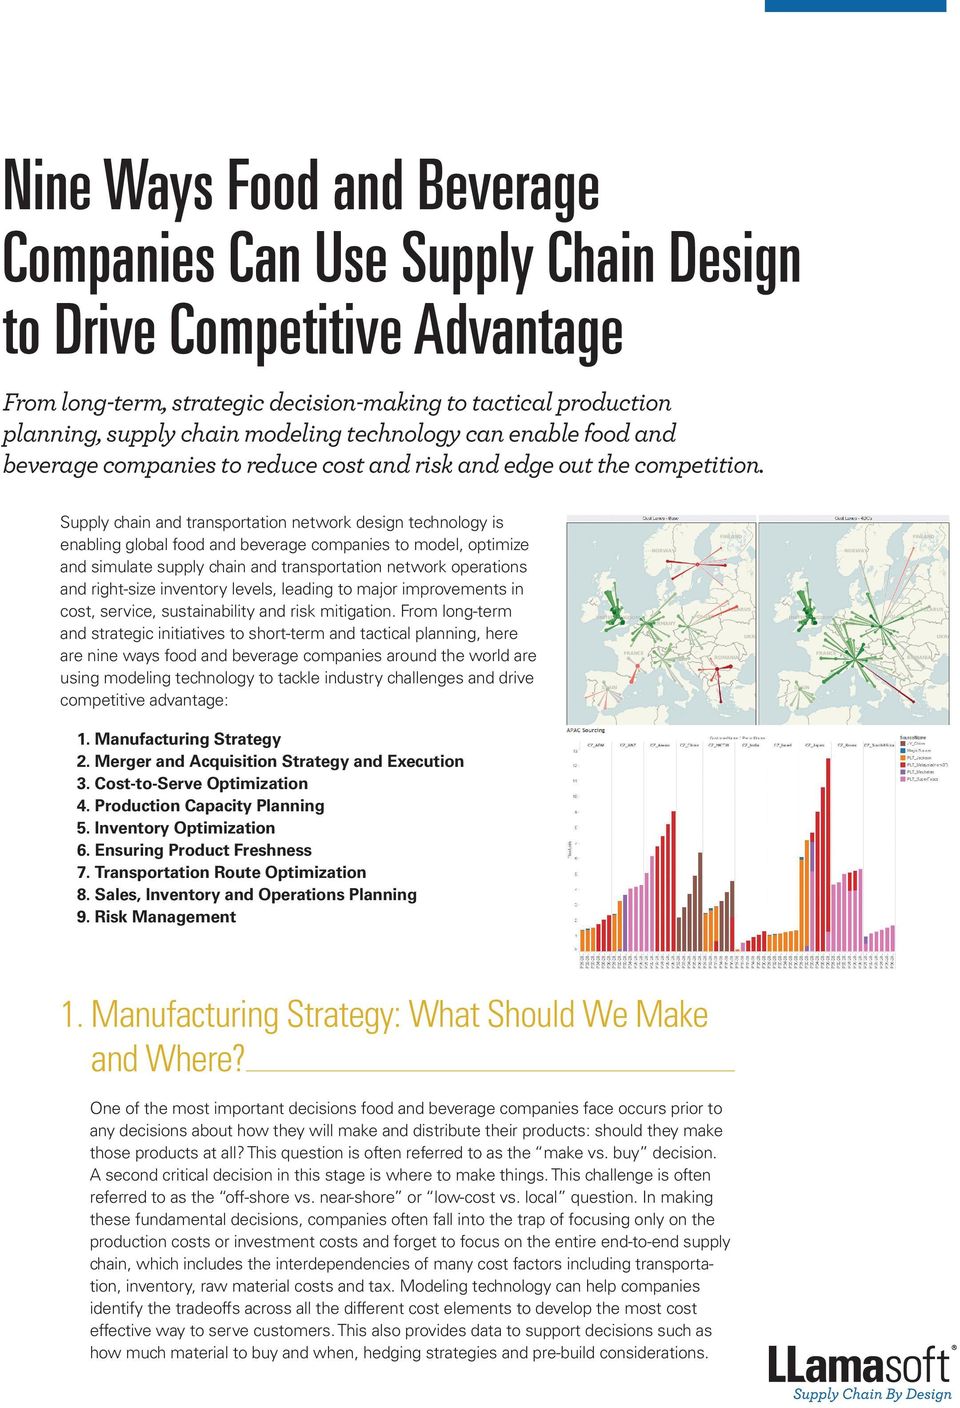 Supply chain and transportation network design technology is enabling global food and beverage companies to model, optimize and simulate supply chain and transportation network operations and